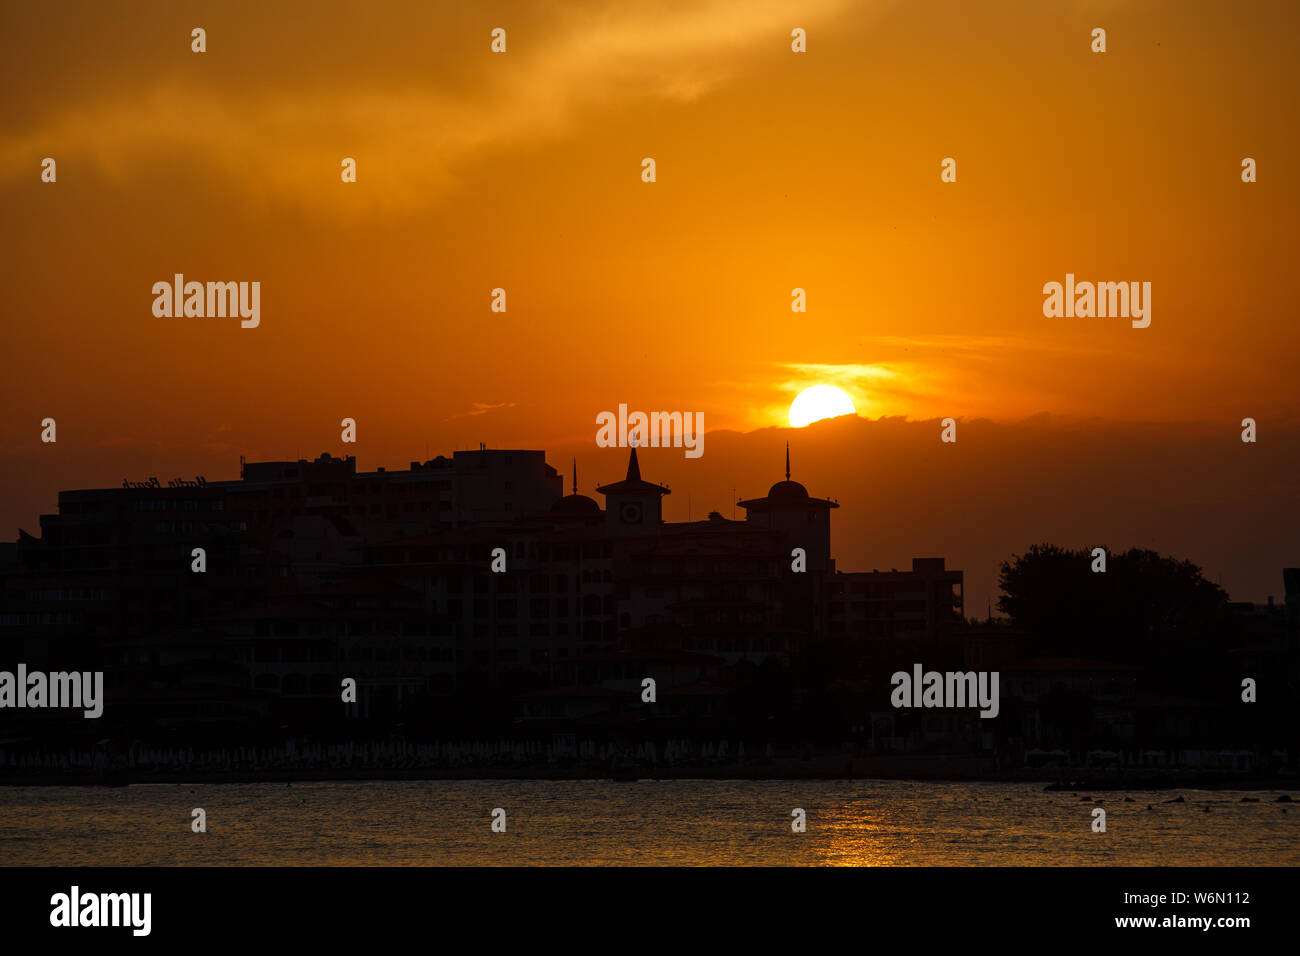 Golden sunset on the beach. Silhouette of the city. Beautiful architecort by the sea on the background of the sunset. Stock Photo